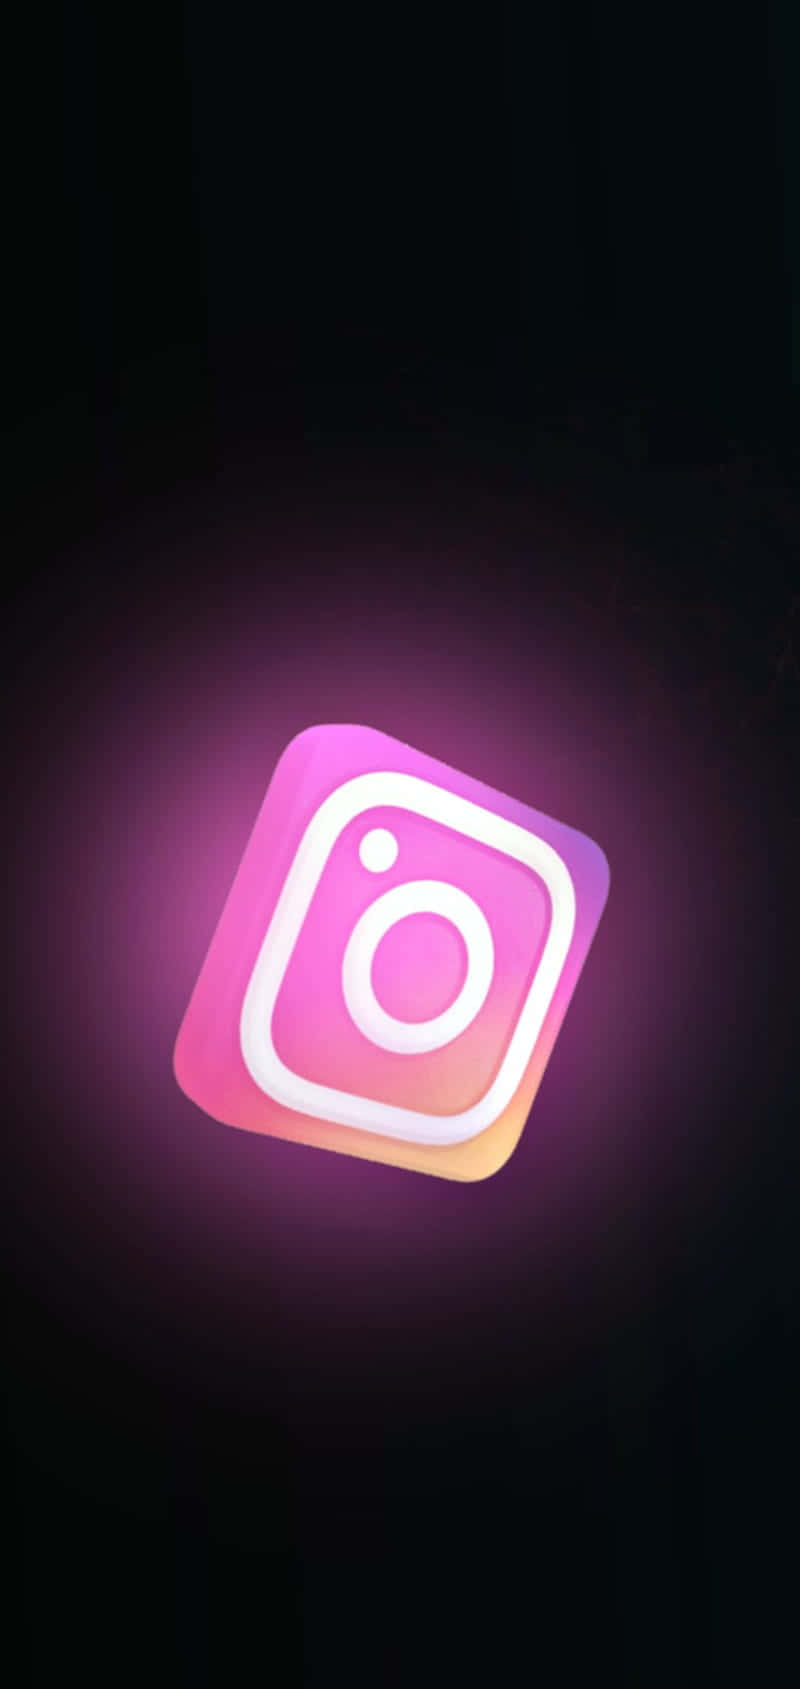 Grow your presence online with Instagram Black